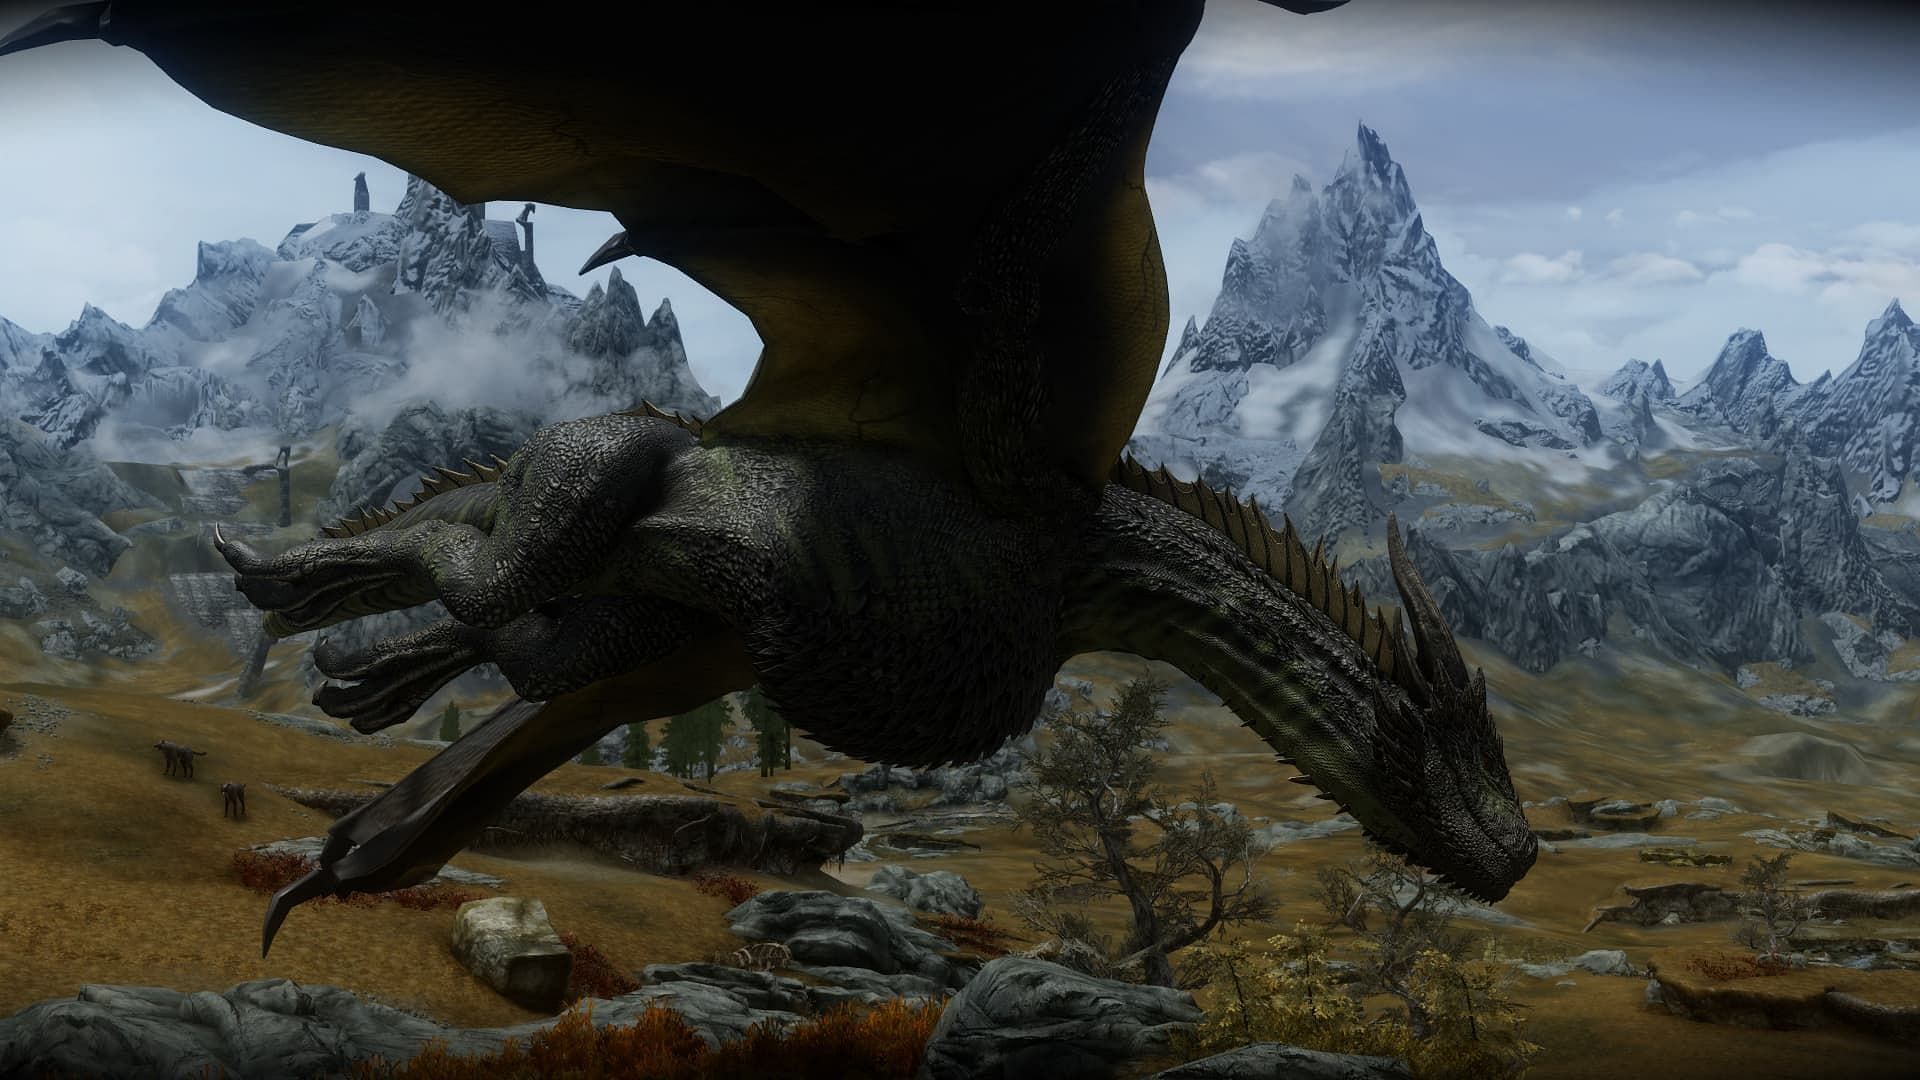 Call of Duty comes to Tamriel with this amazing Skyrim mod